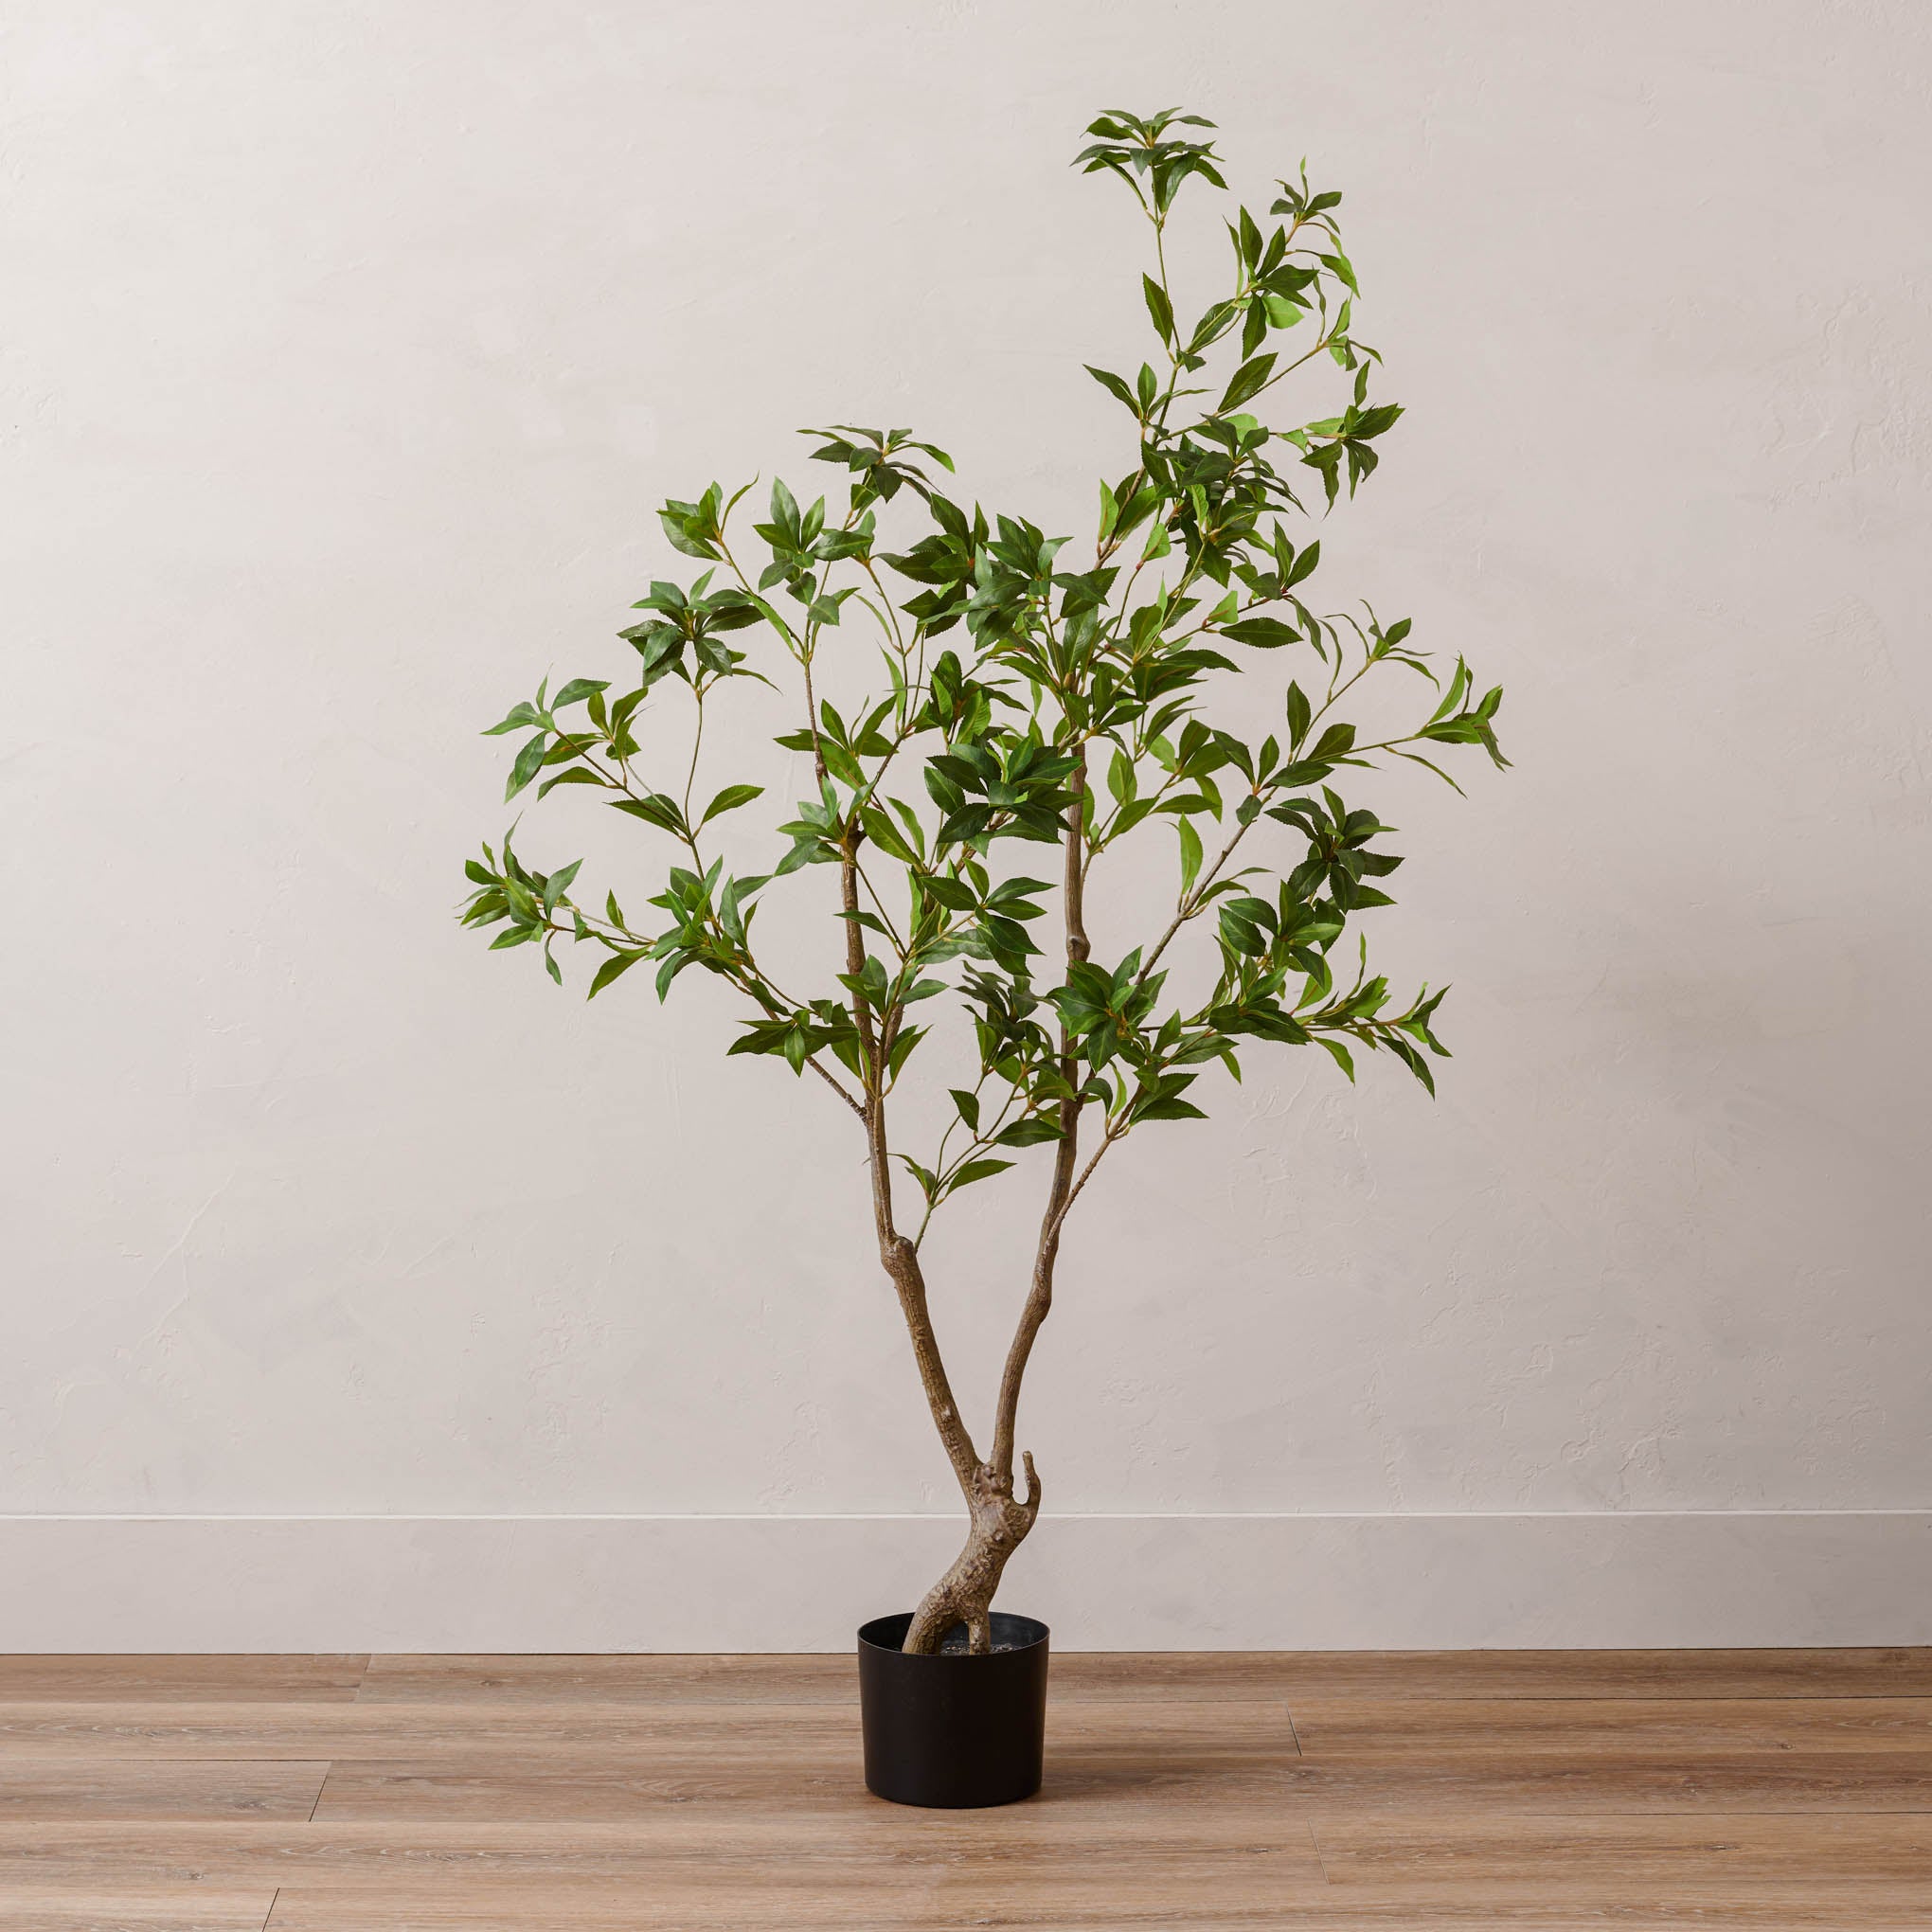 62" Pieris Japonica Tree in Plastic Pot On sale for $122.50, discounted from $175.00